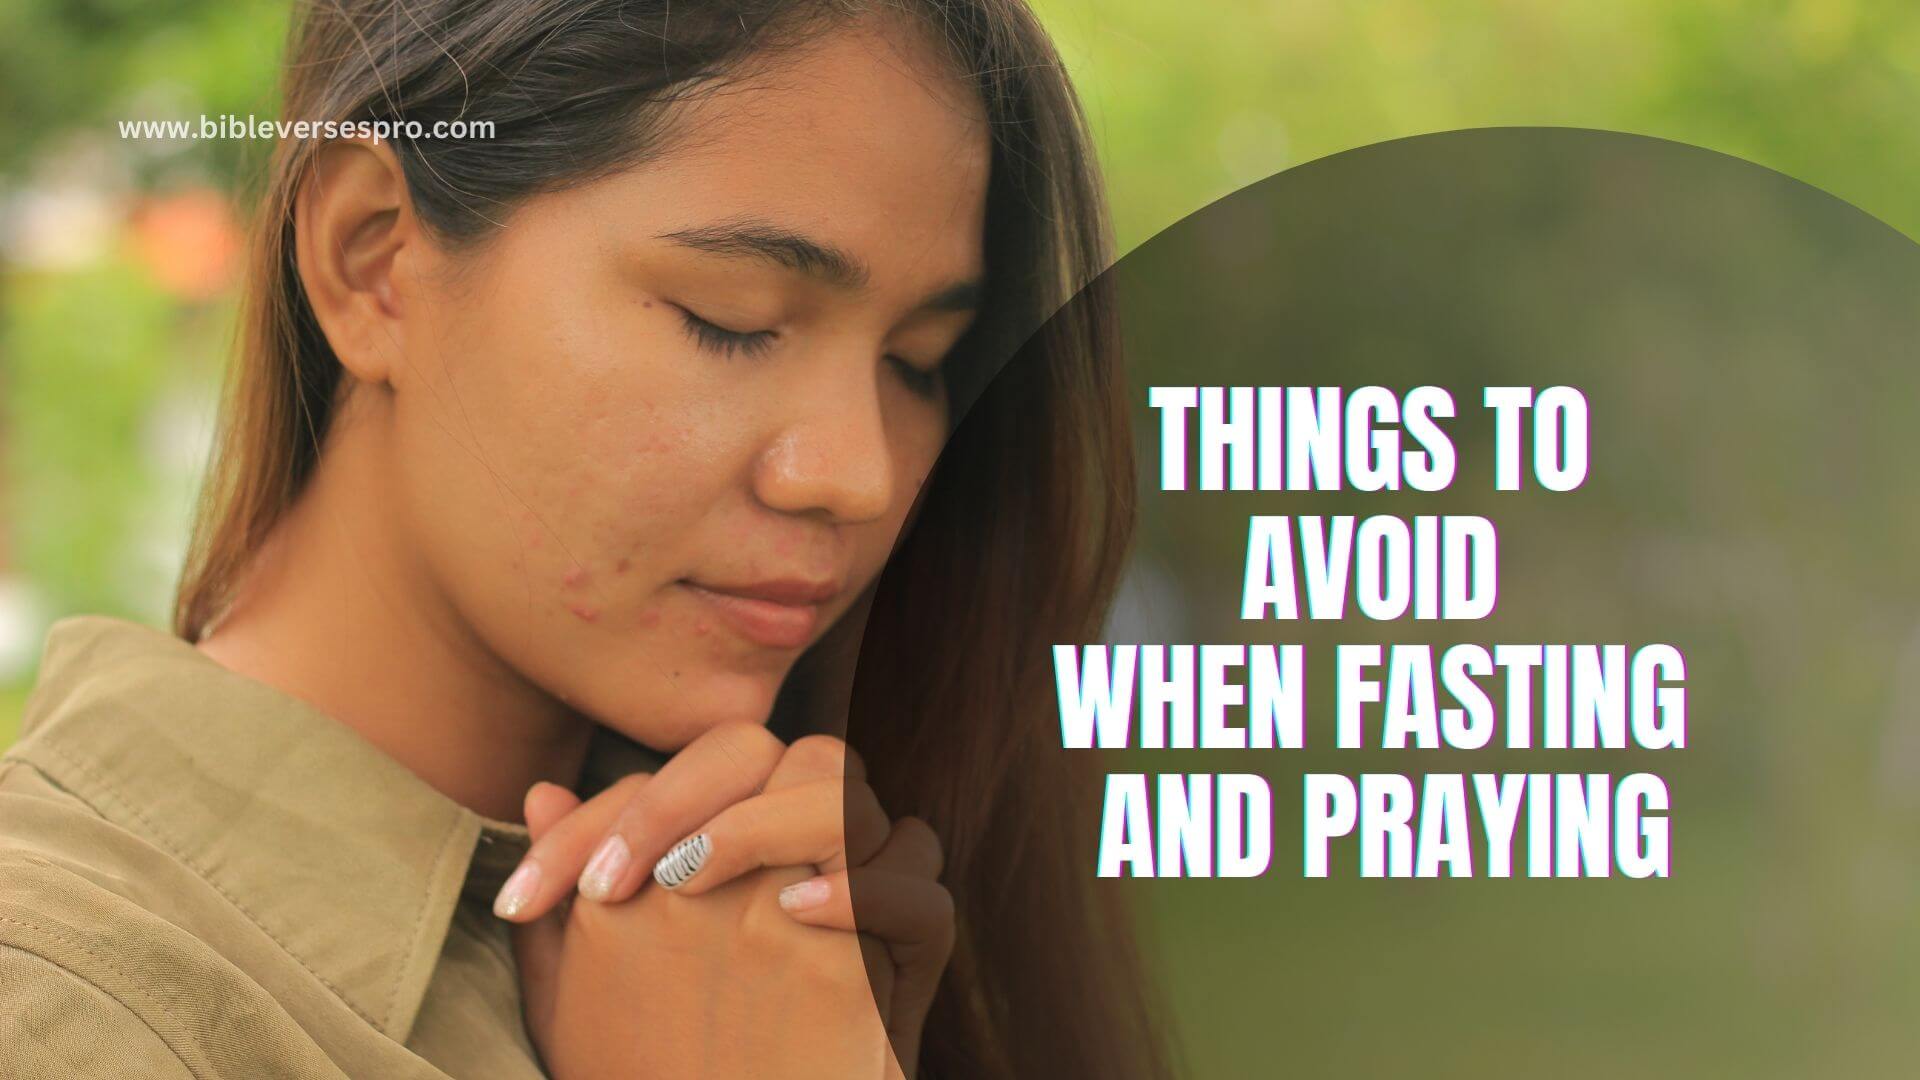 THINGS TO AVOID WHEN FASTING AND PRAYING (1)